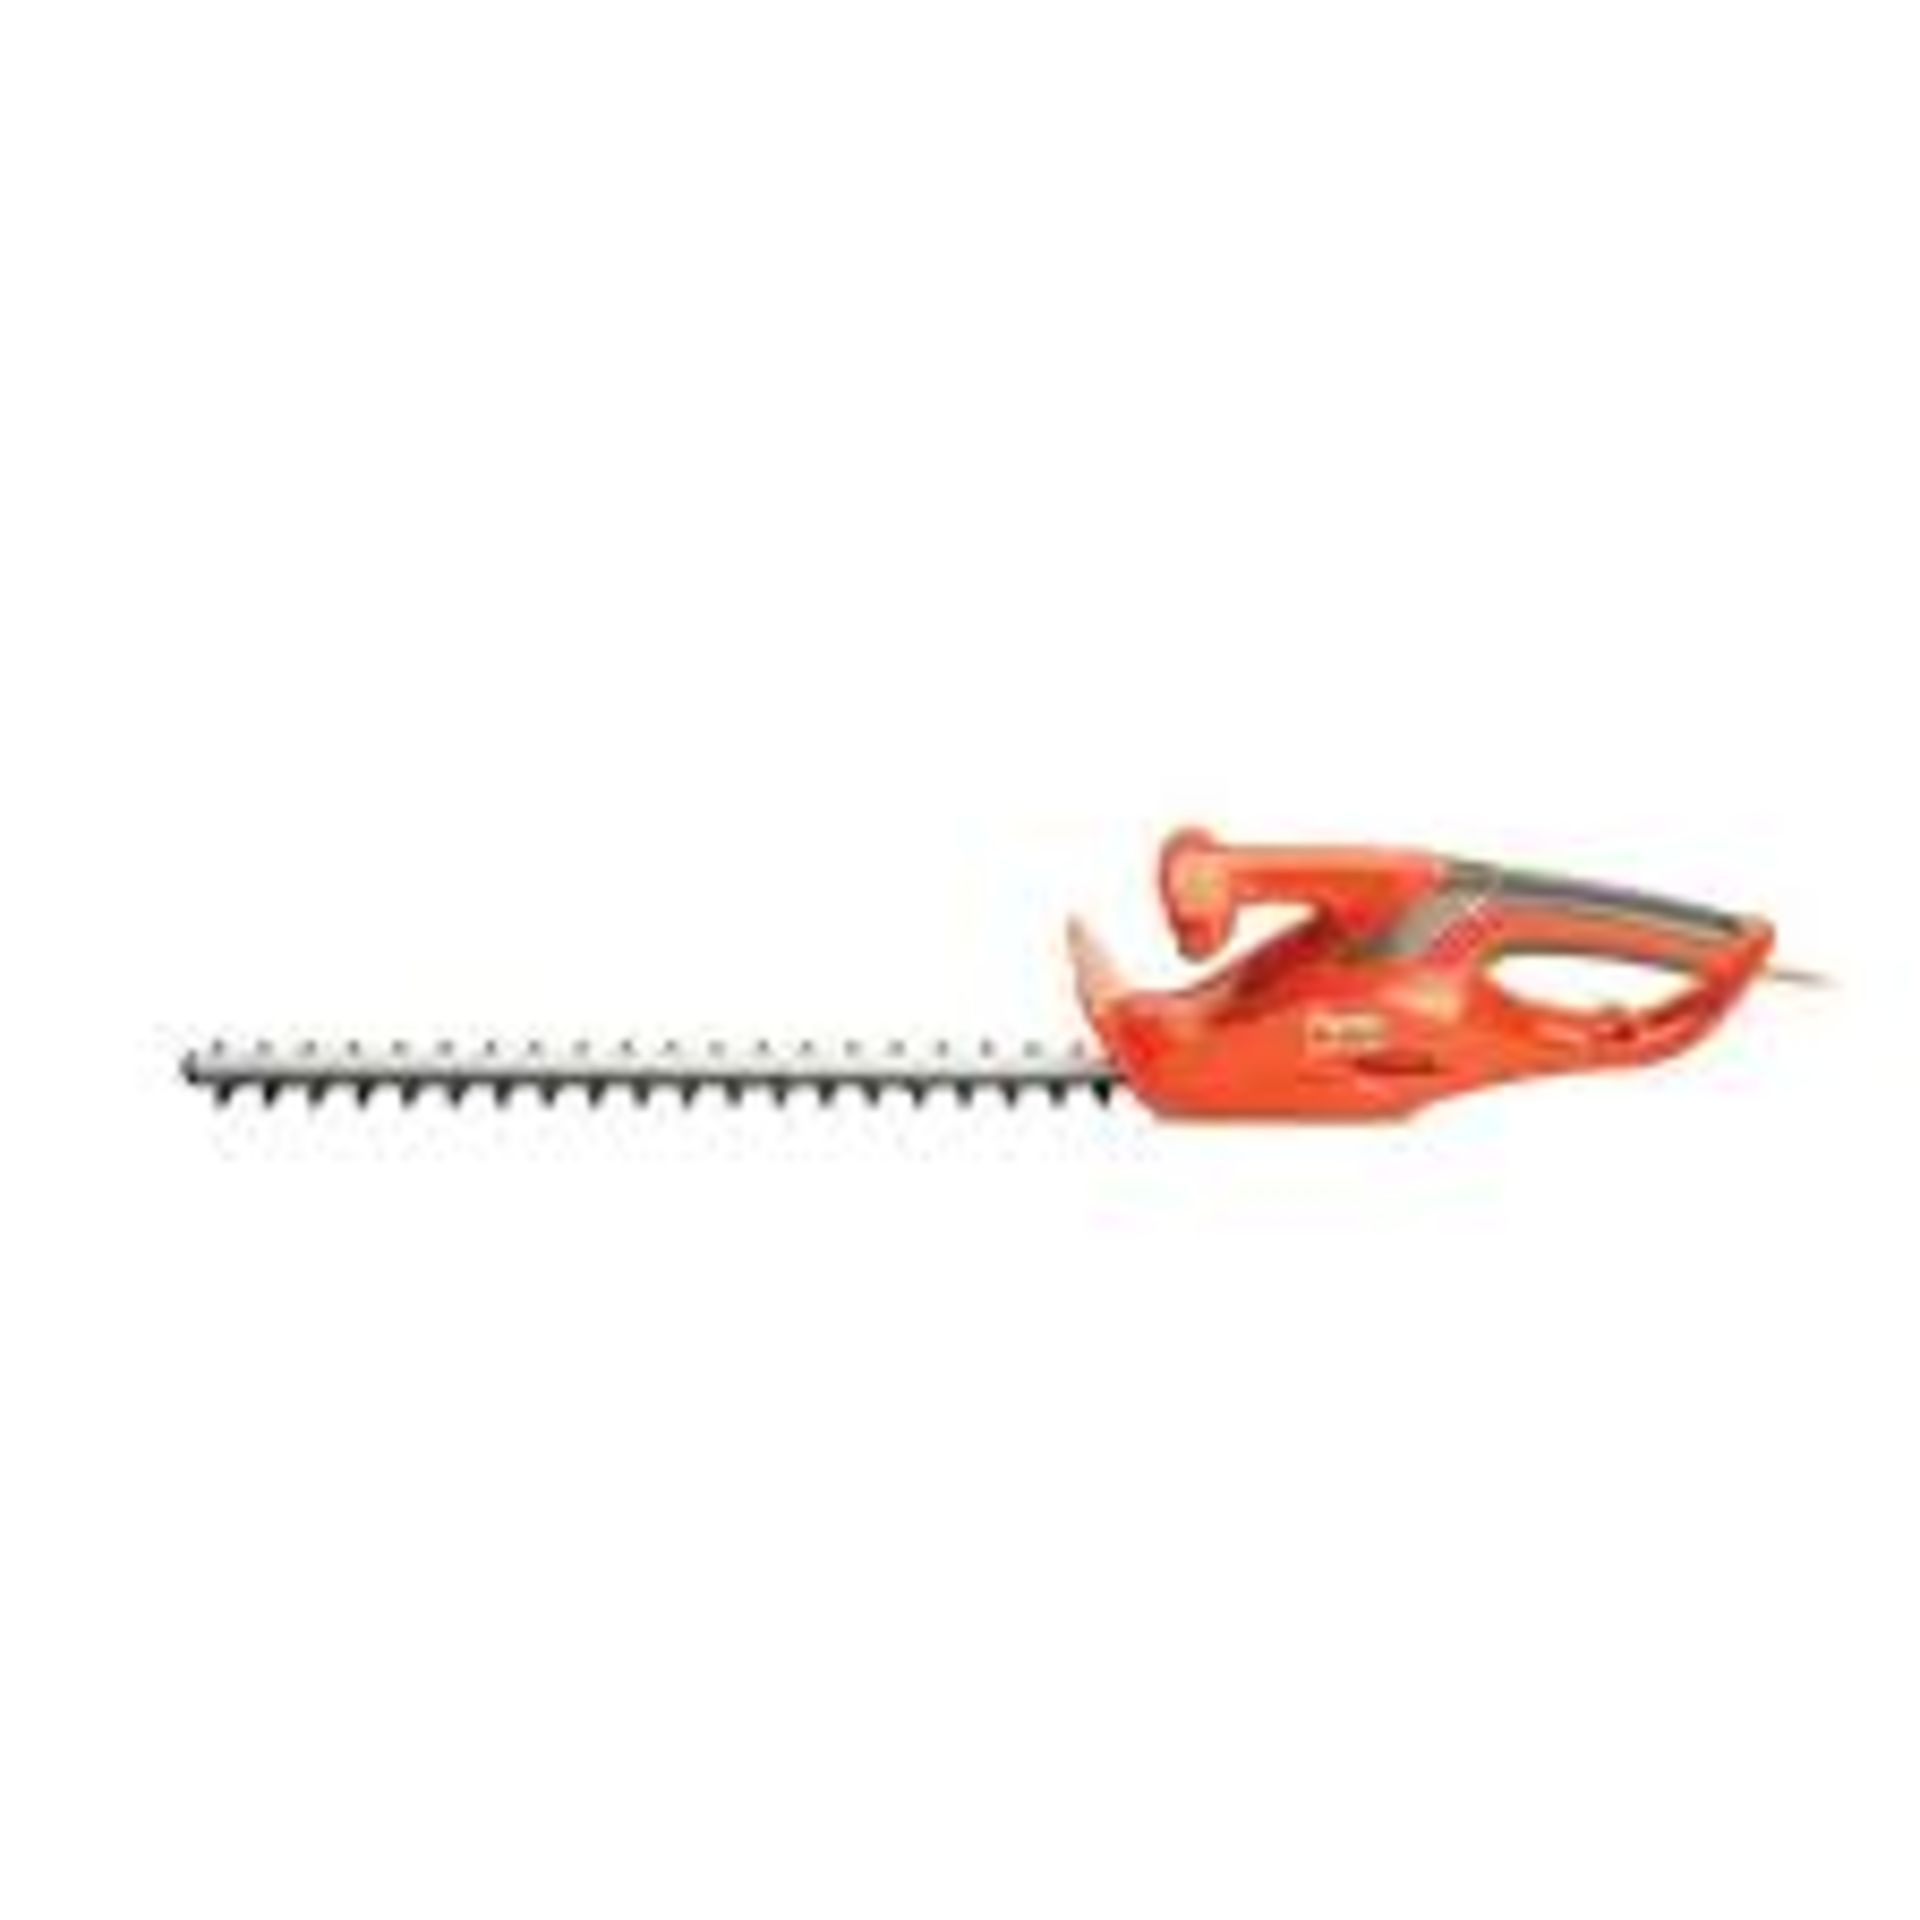 Flymo Easicut 460 Electric Hedge Trimmer. - R13a.9.